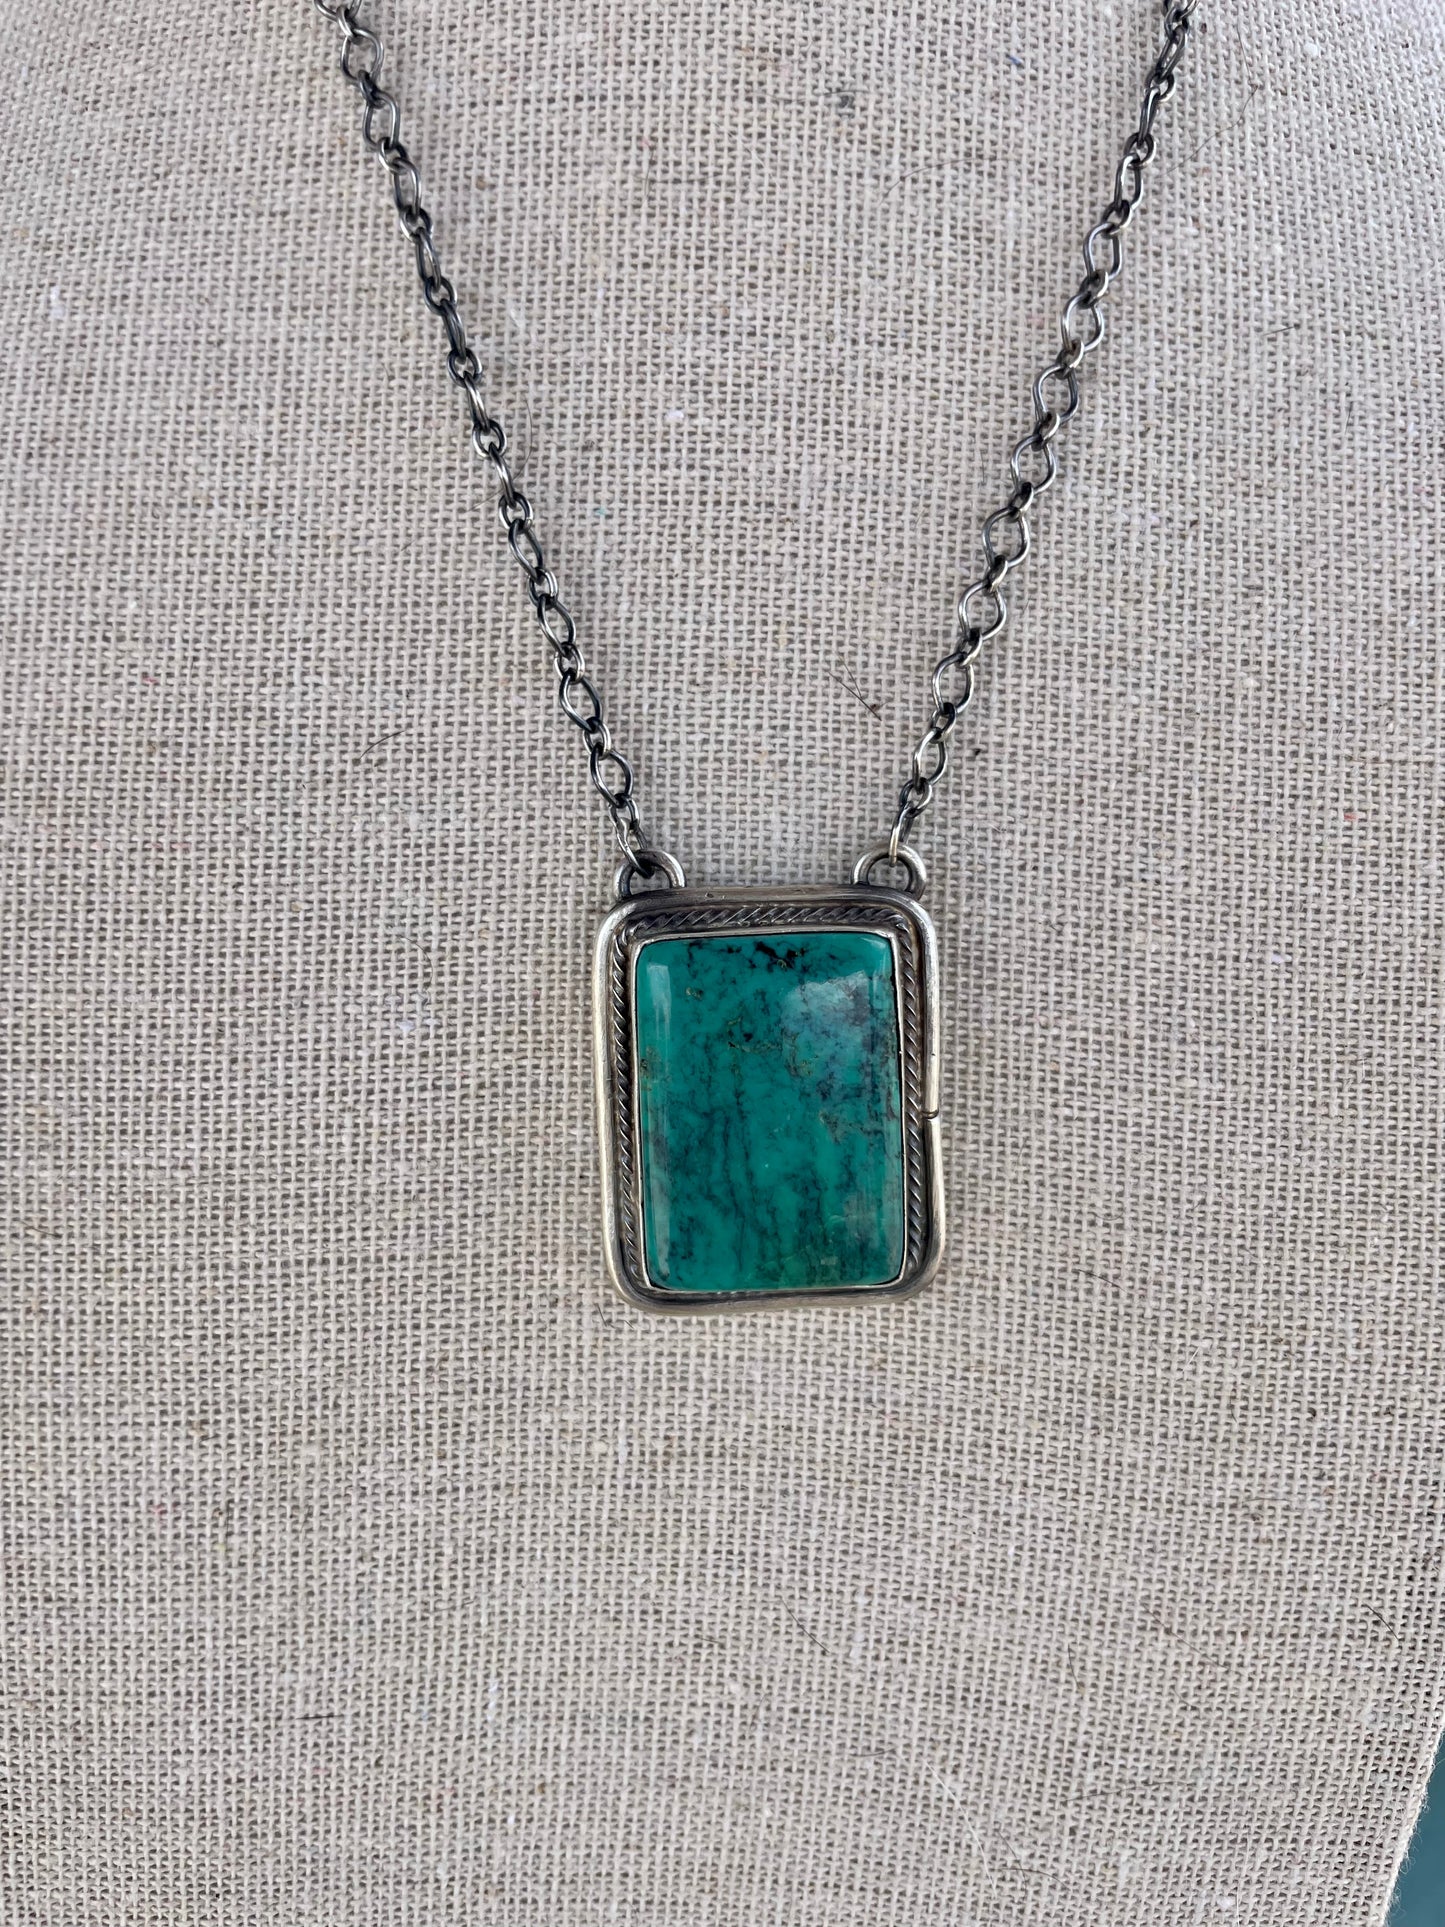 Navajo Sterling Silver & Tibetan Turquoise Necklace